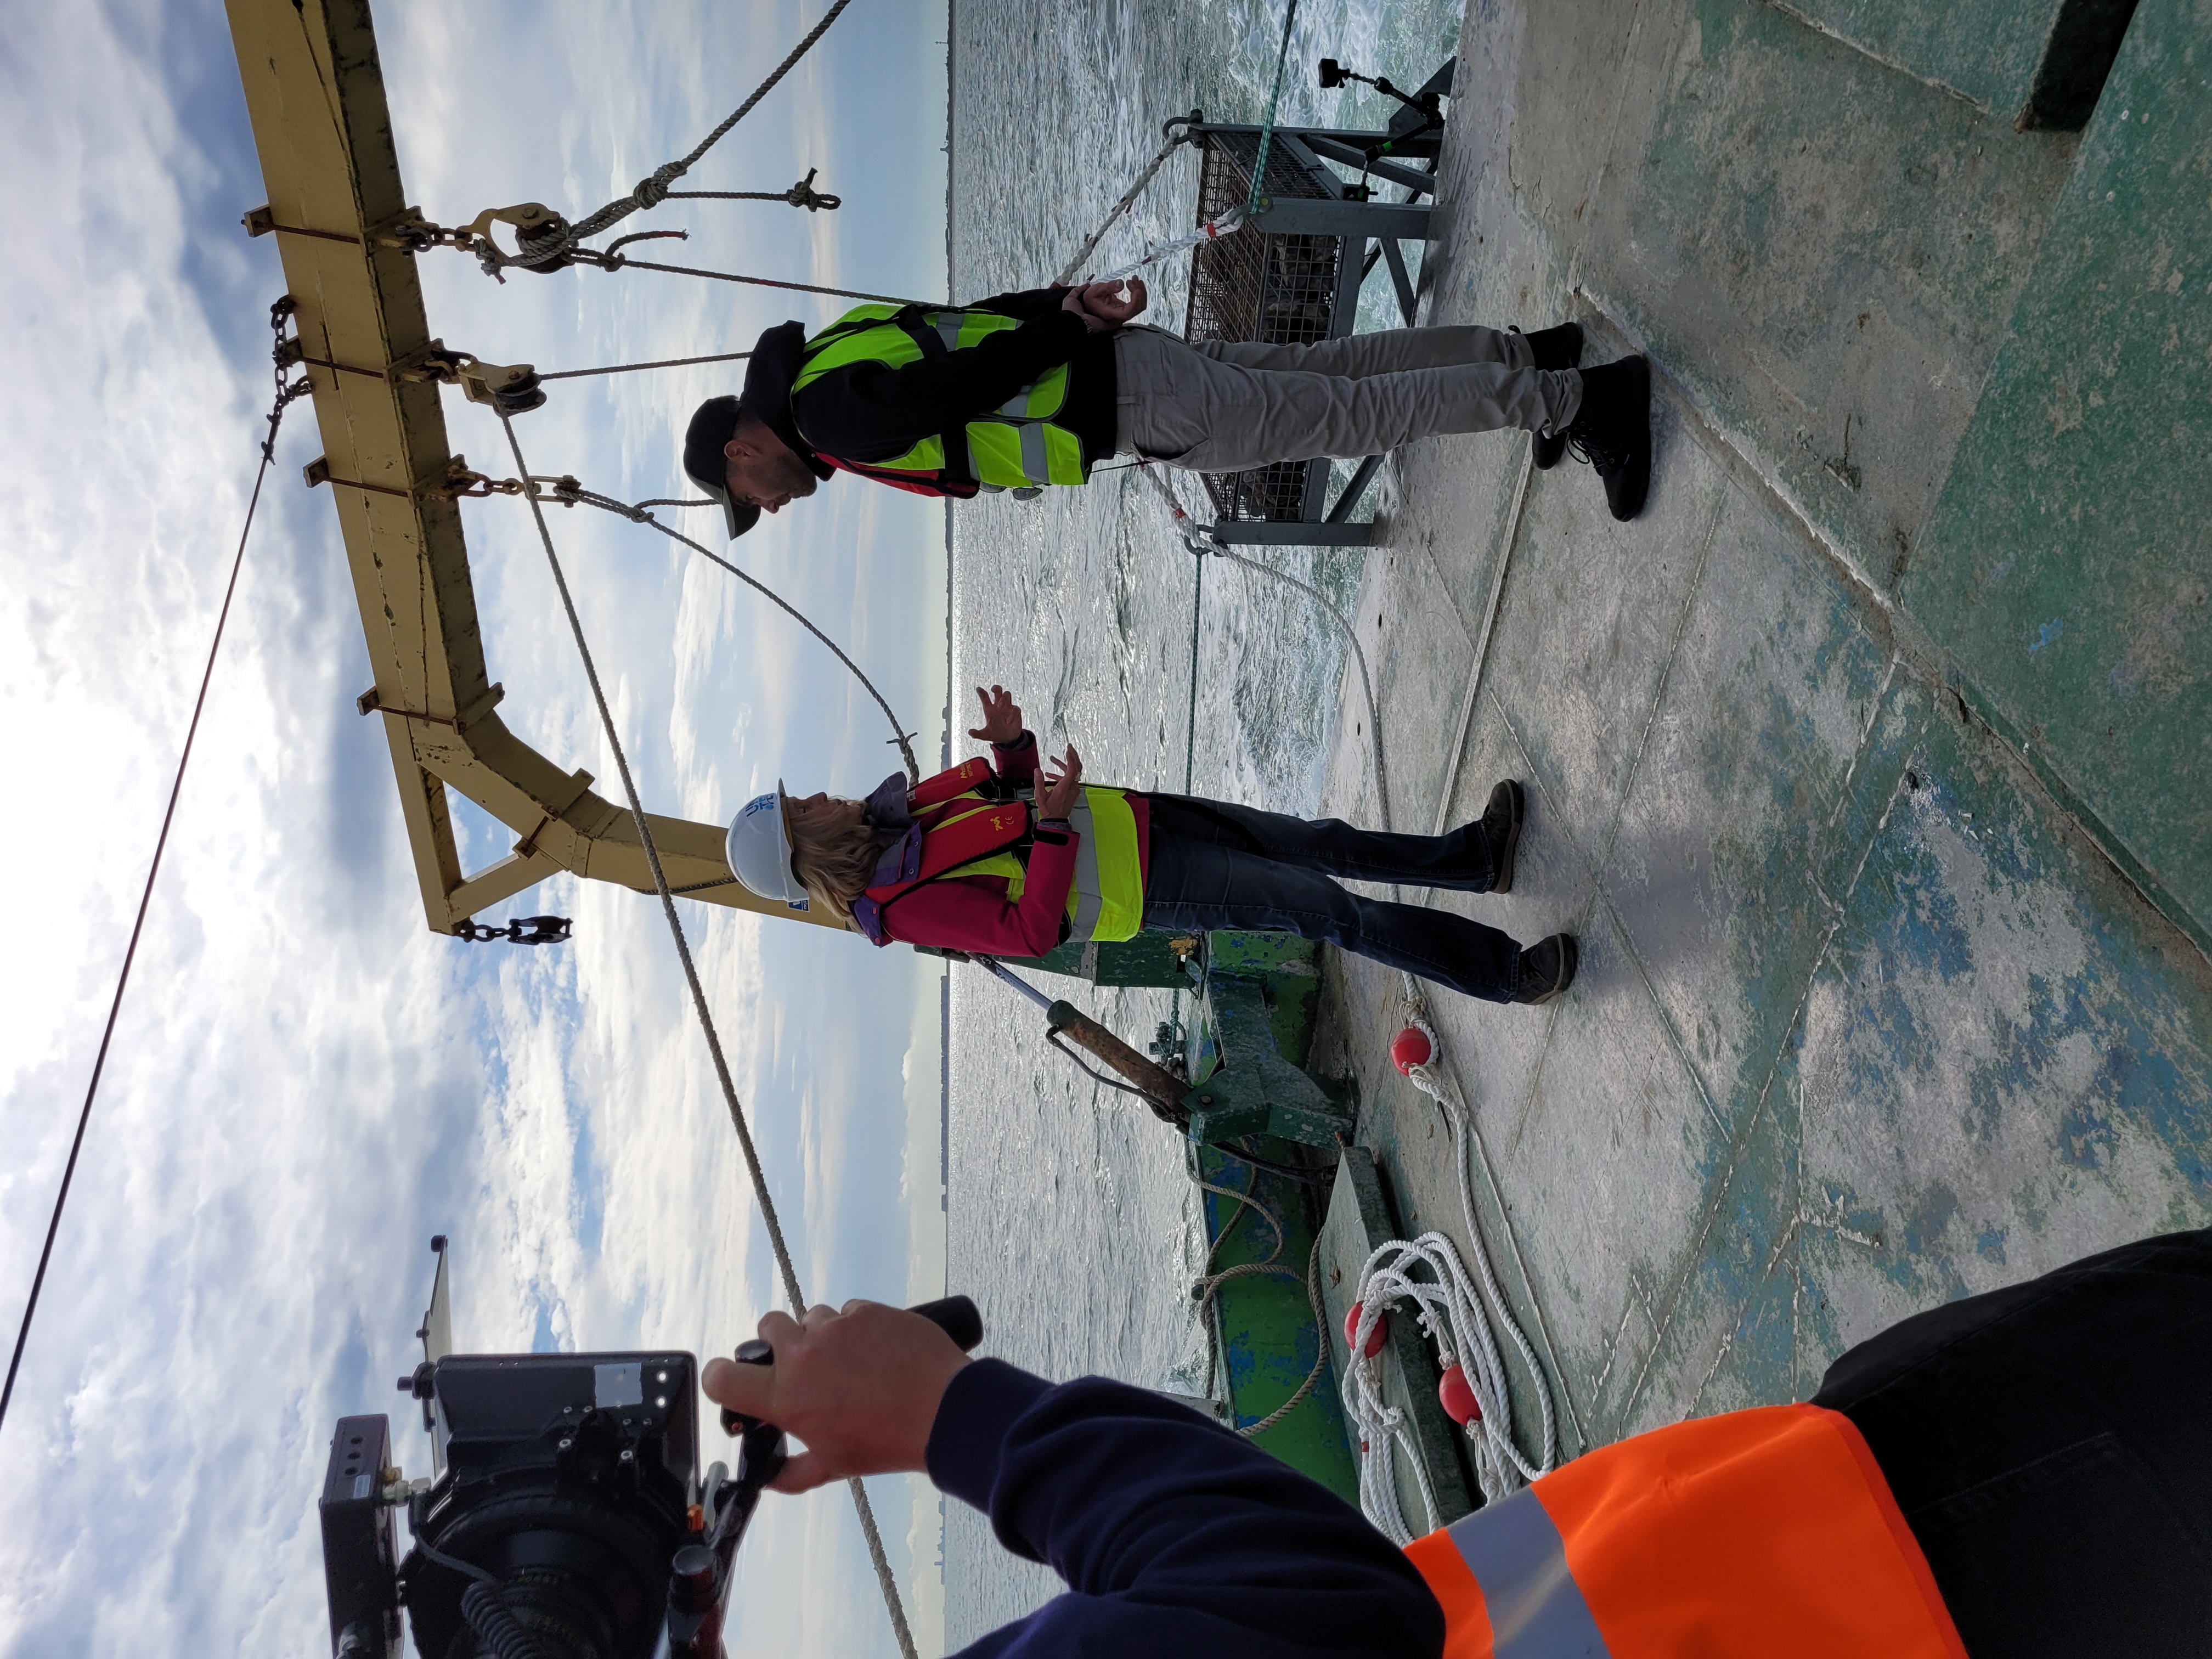 Belgian Pilot News | Mission day with the Belgian television on board